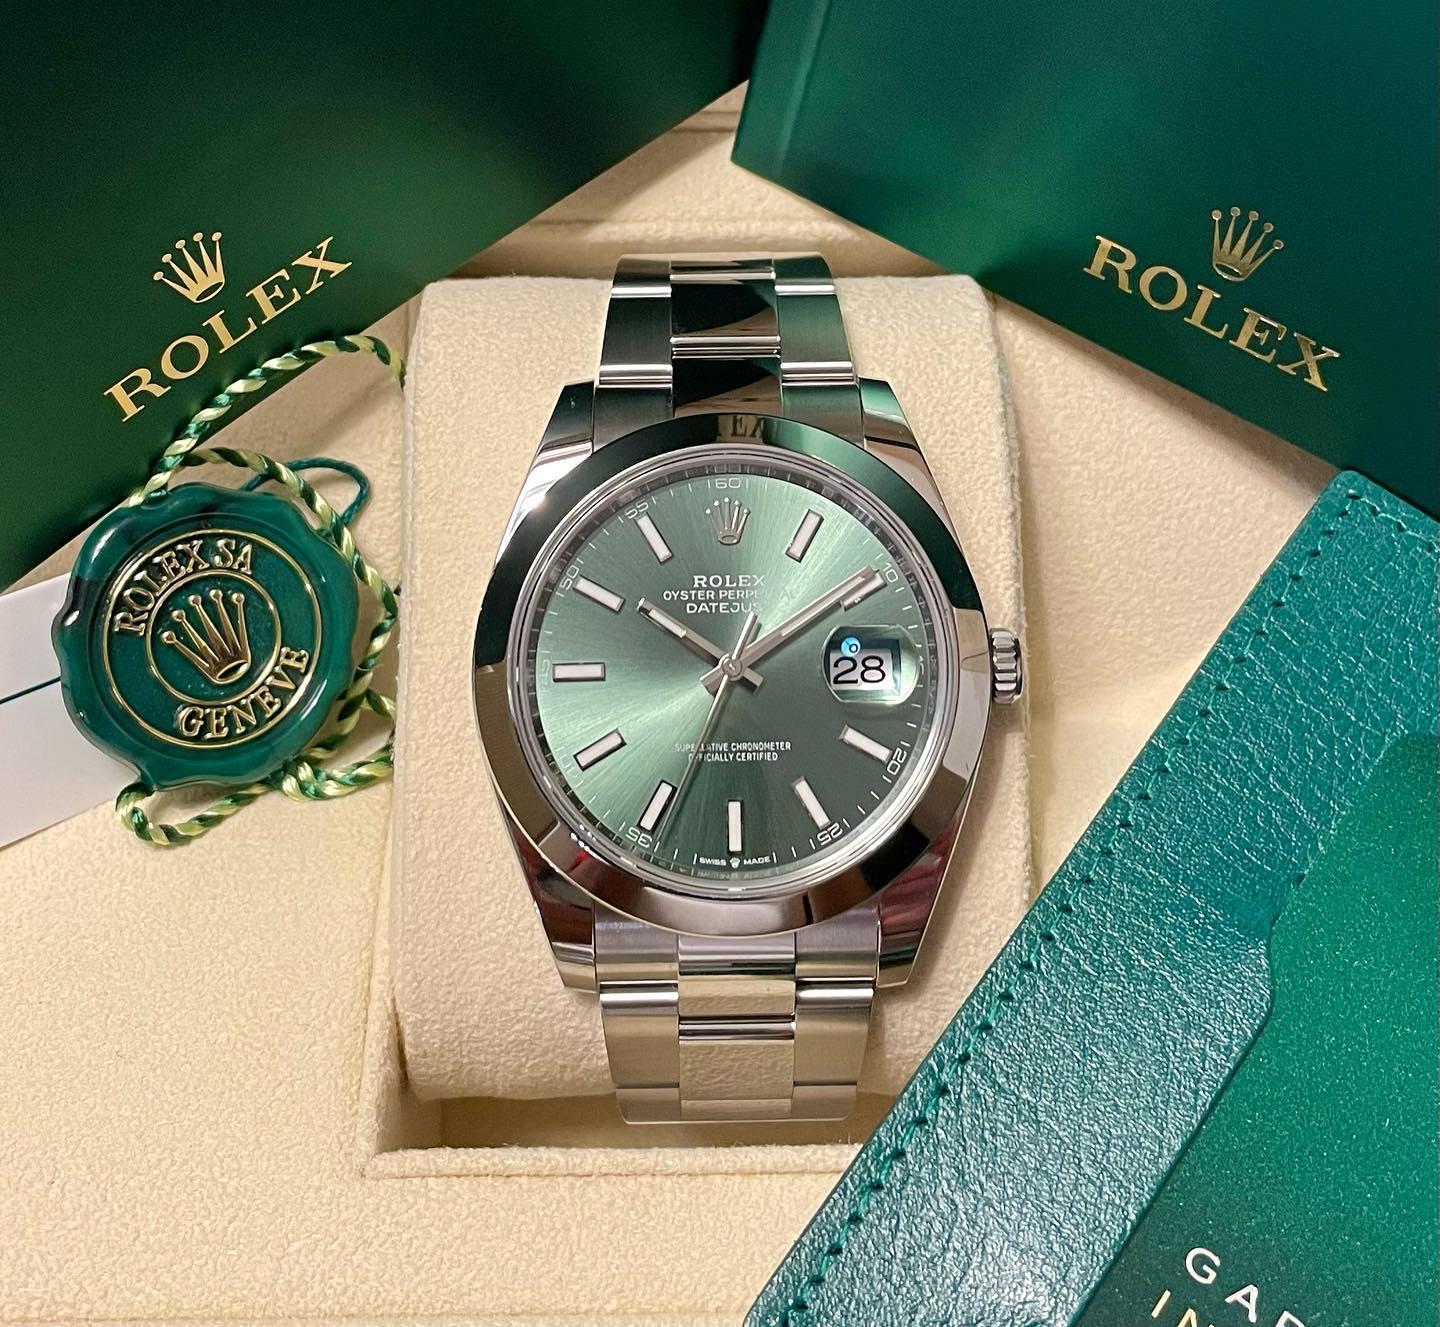 Please be patient and read the disclaimer carefully before asking any questions.
Please don’t send us Price Requests.
This is a new 2022 model, which was introduced earlier this year, but is still not available at Rolex retail stores.
At the moment